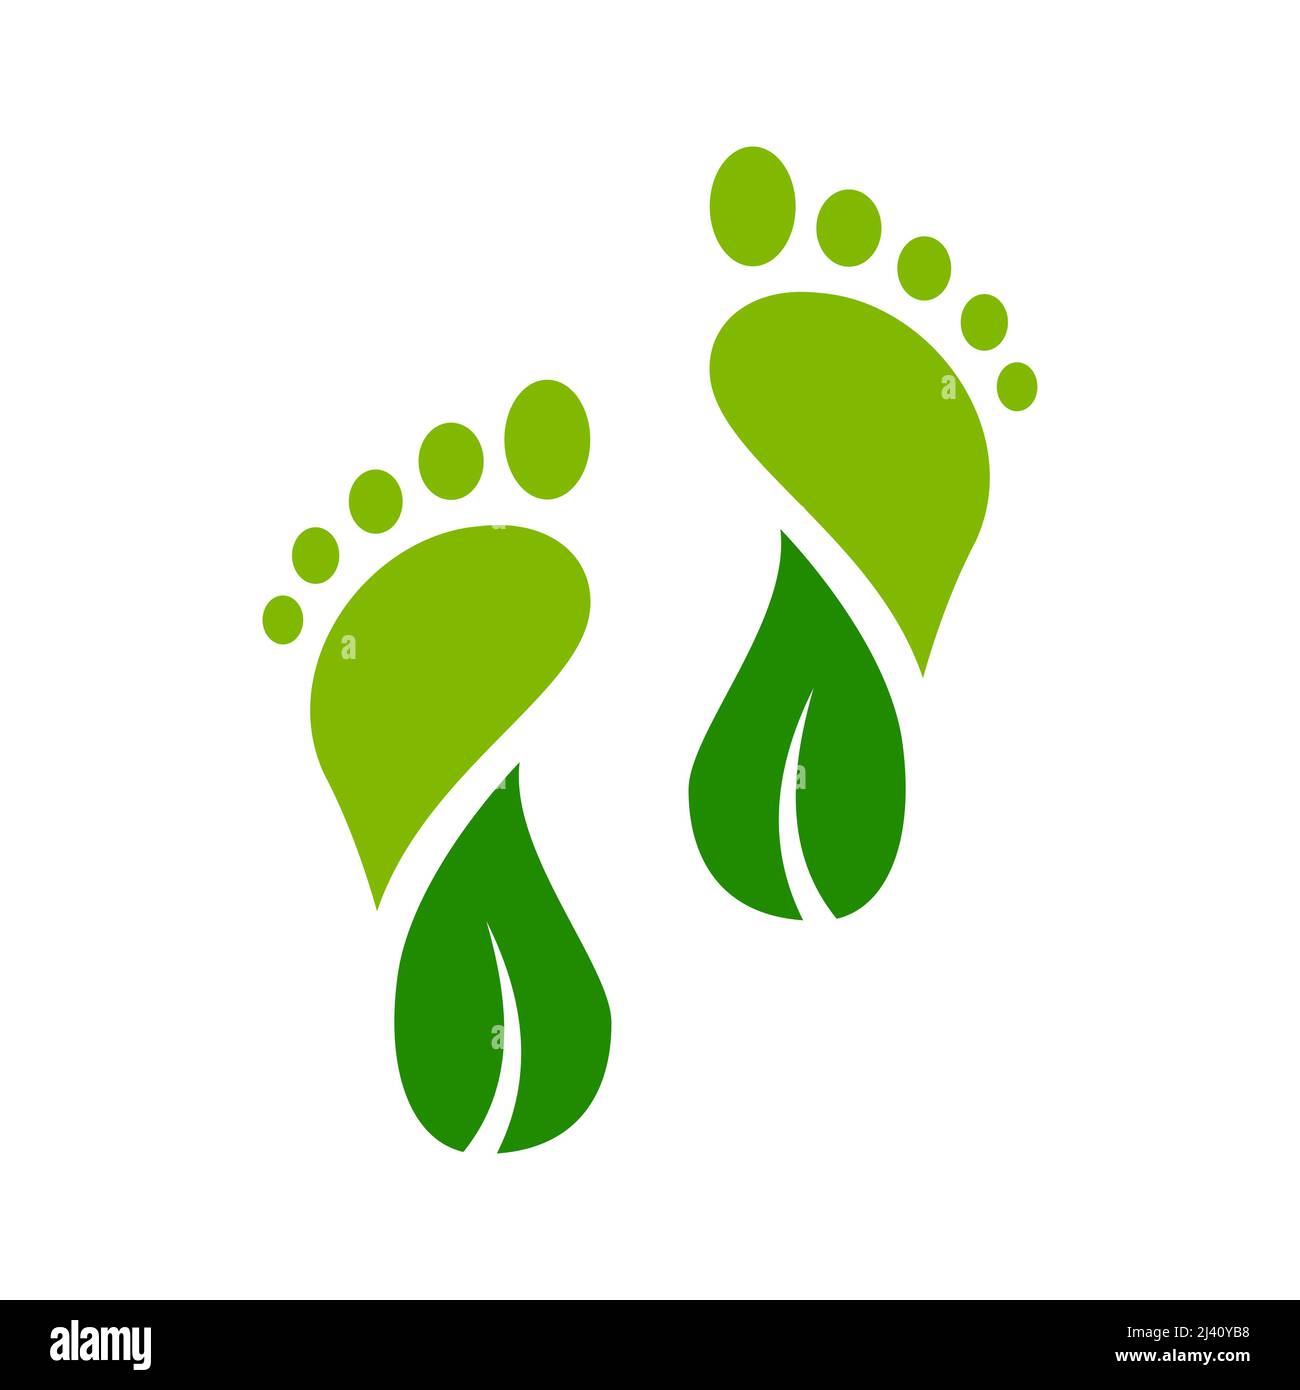 Foot in shape of a leaf. Carbon neutrality. Feet with a leaves. Zero carbon footprint concept. Green step. Environmental friendly action idea. Vector Stock Vector